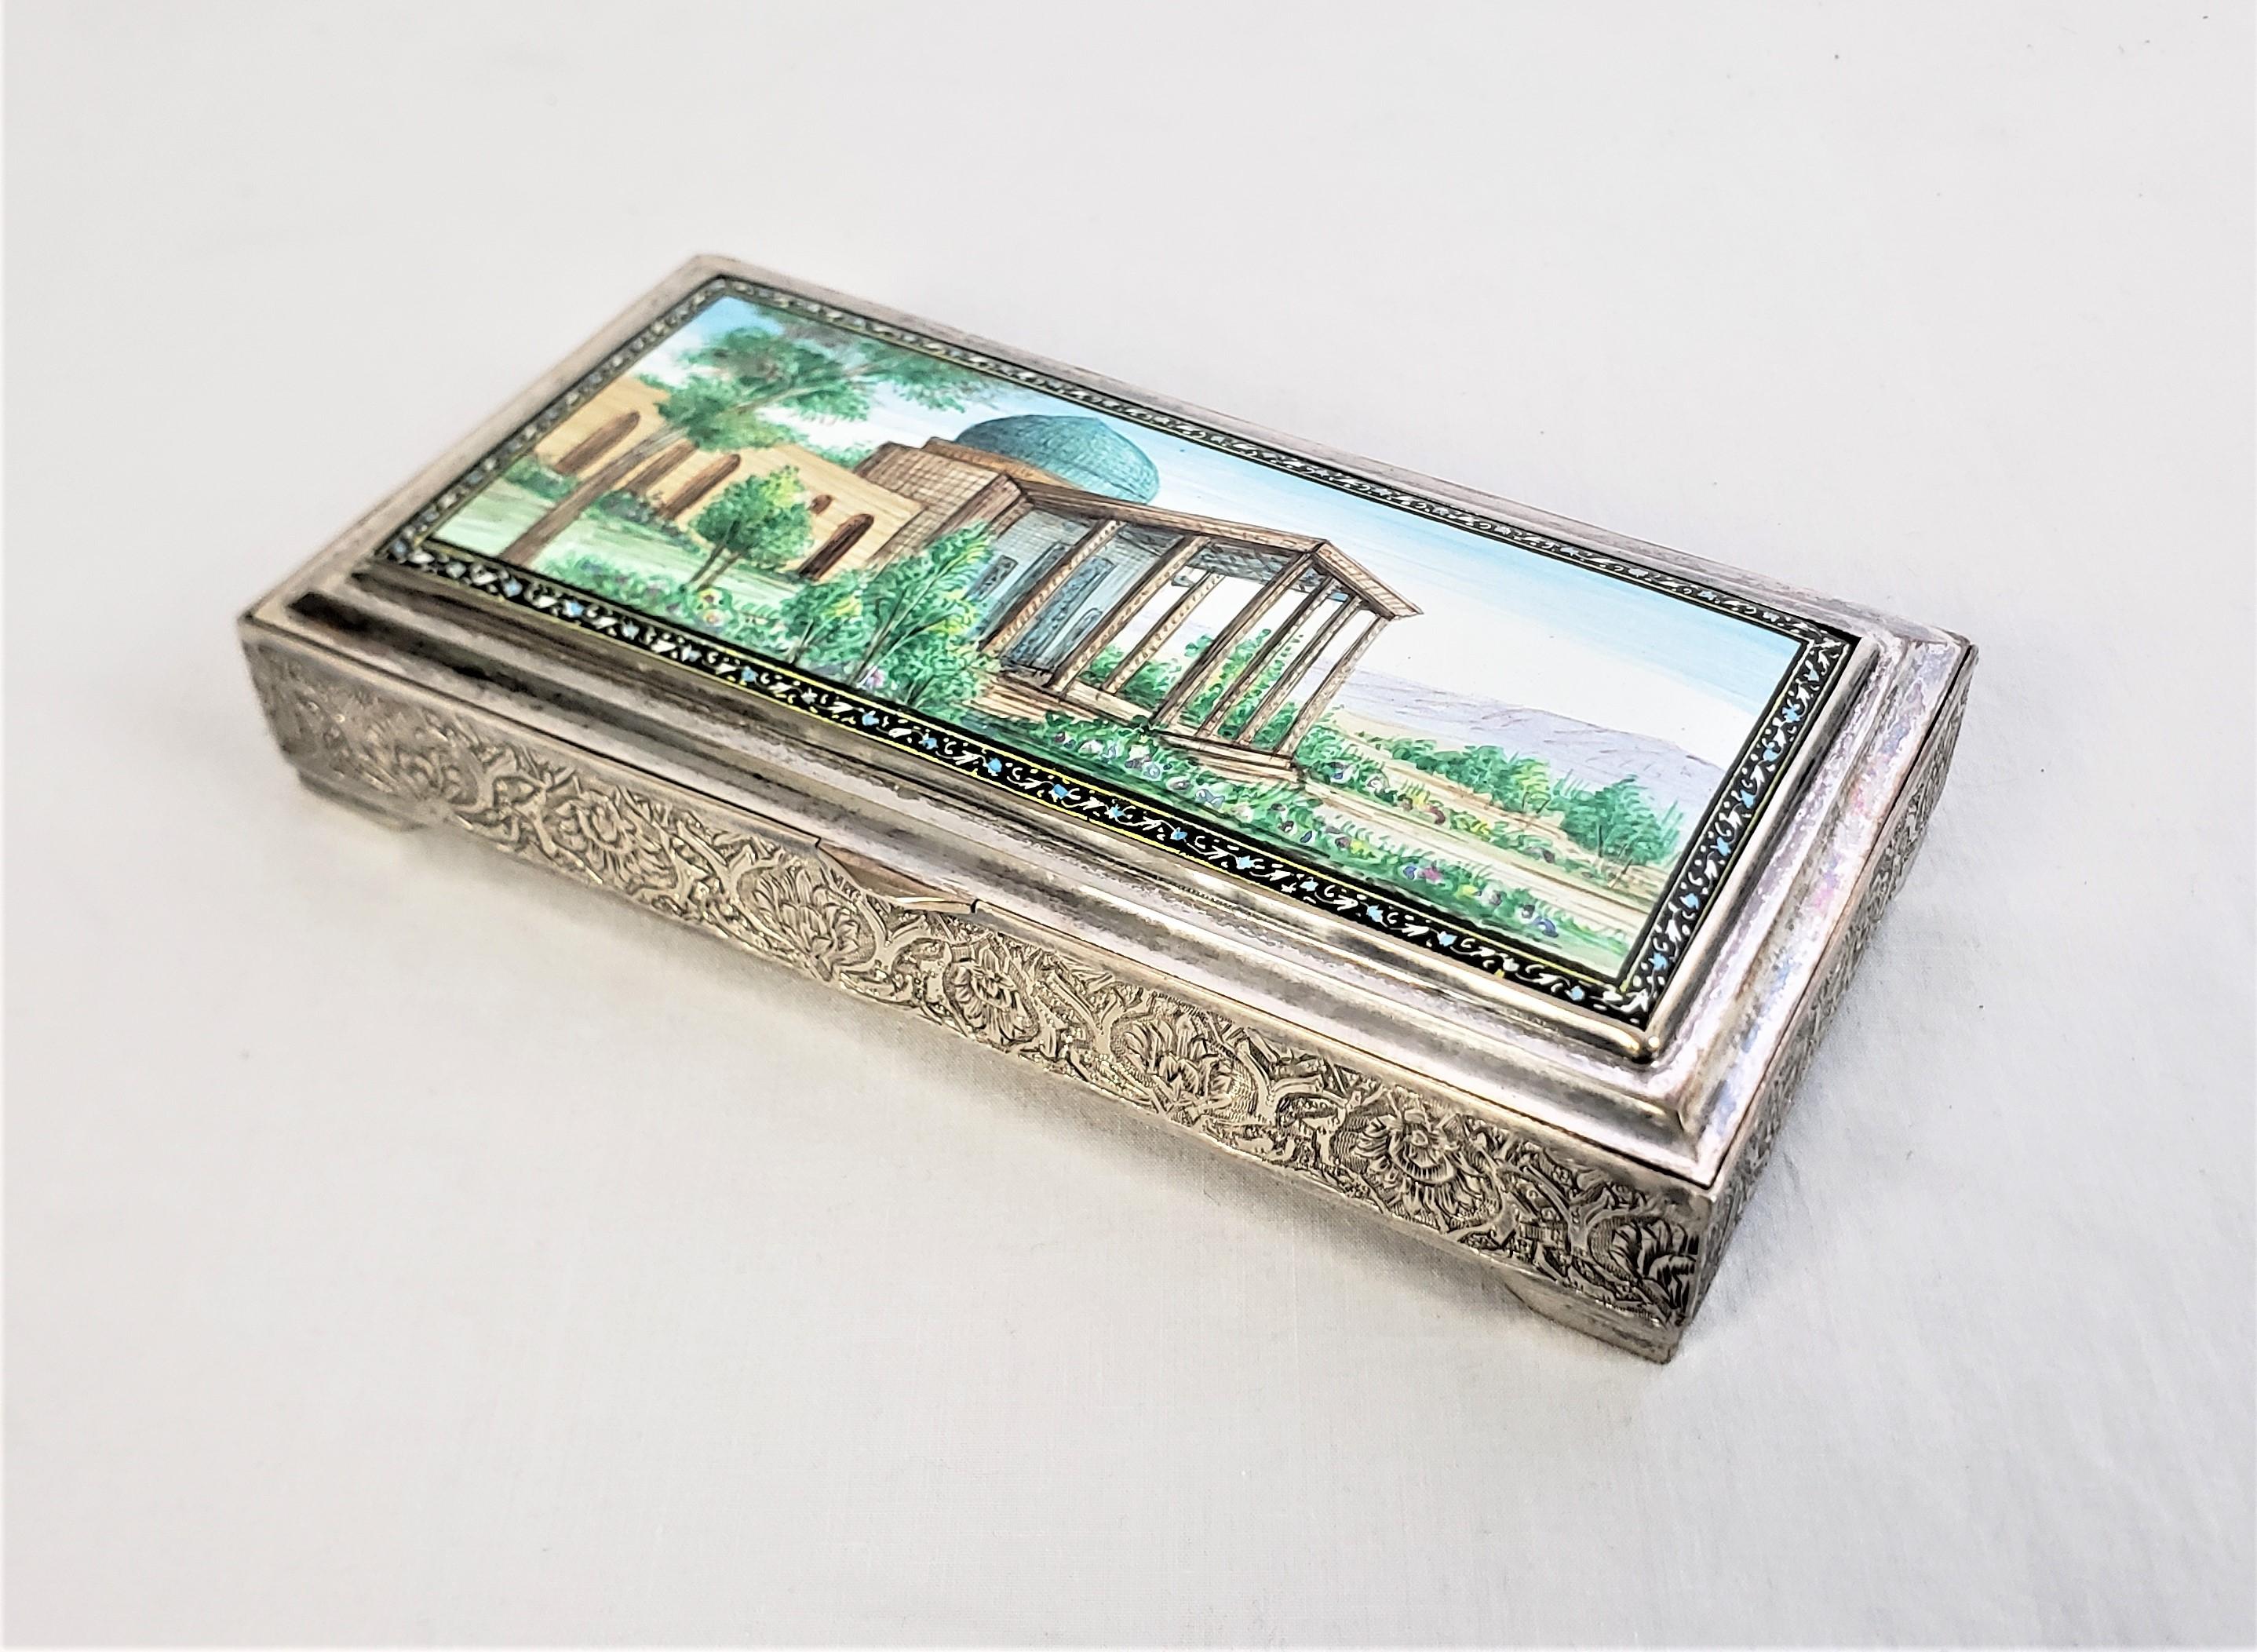 Emirian Antique Sterling Silver & Enamel Arabian Box with Chased Decoration For Sale